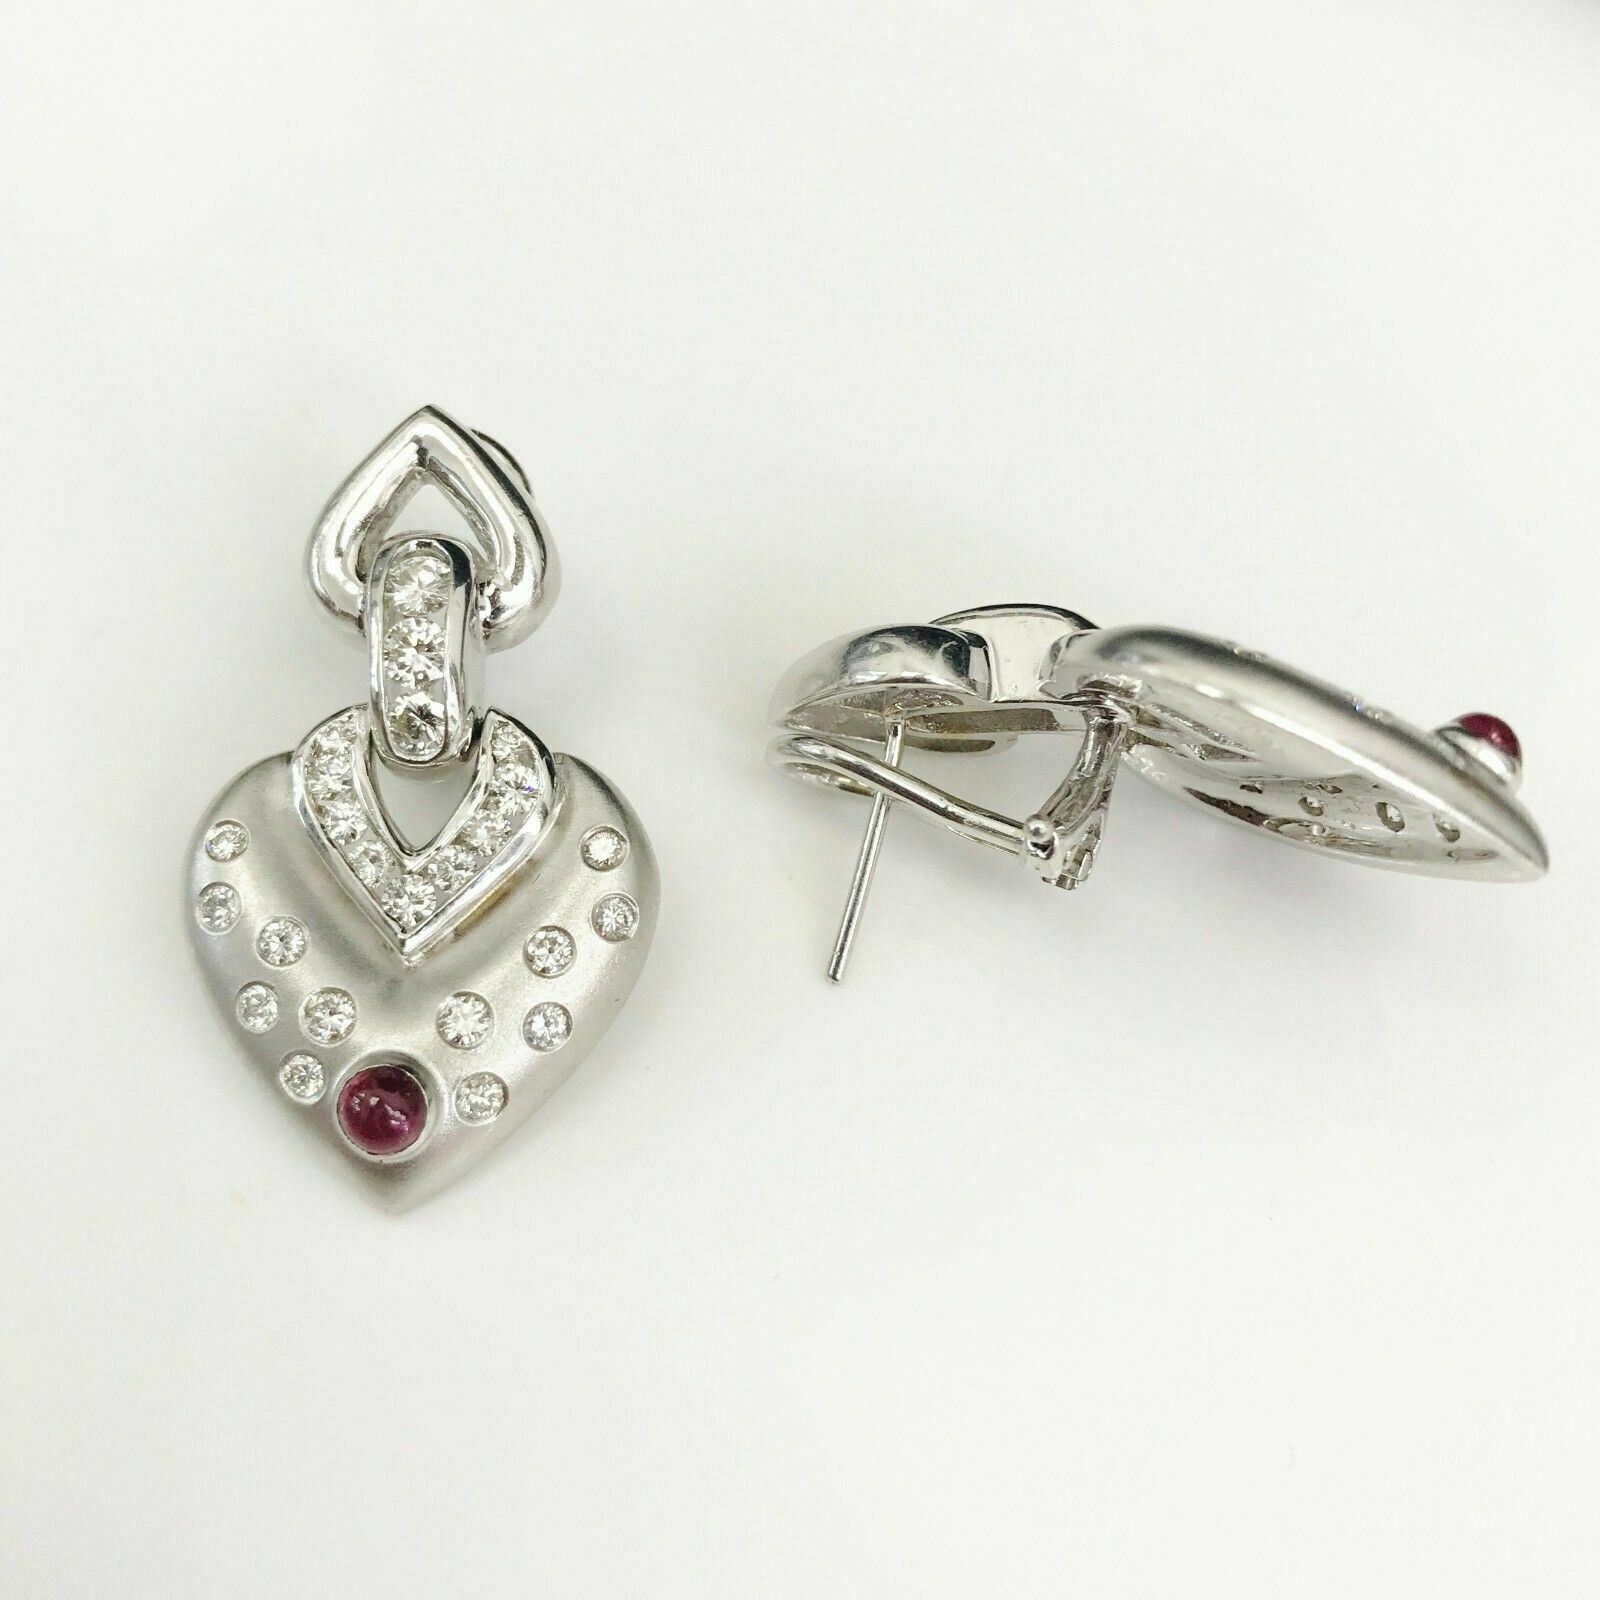 1.75 ct Diamond and Ruby Heart Drop Earrings in 14K White Gold